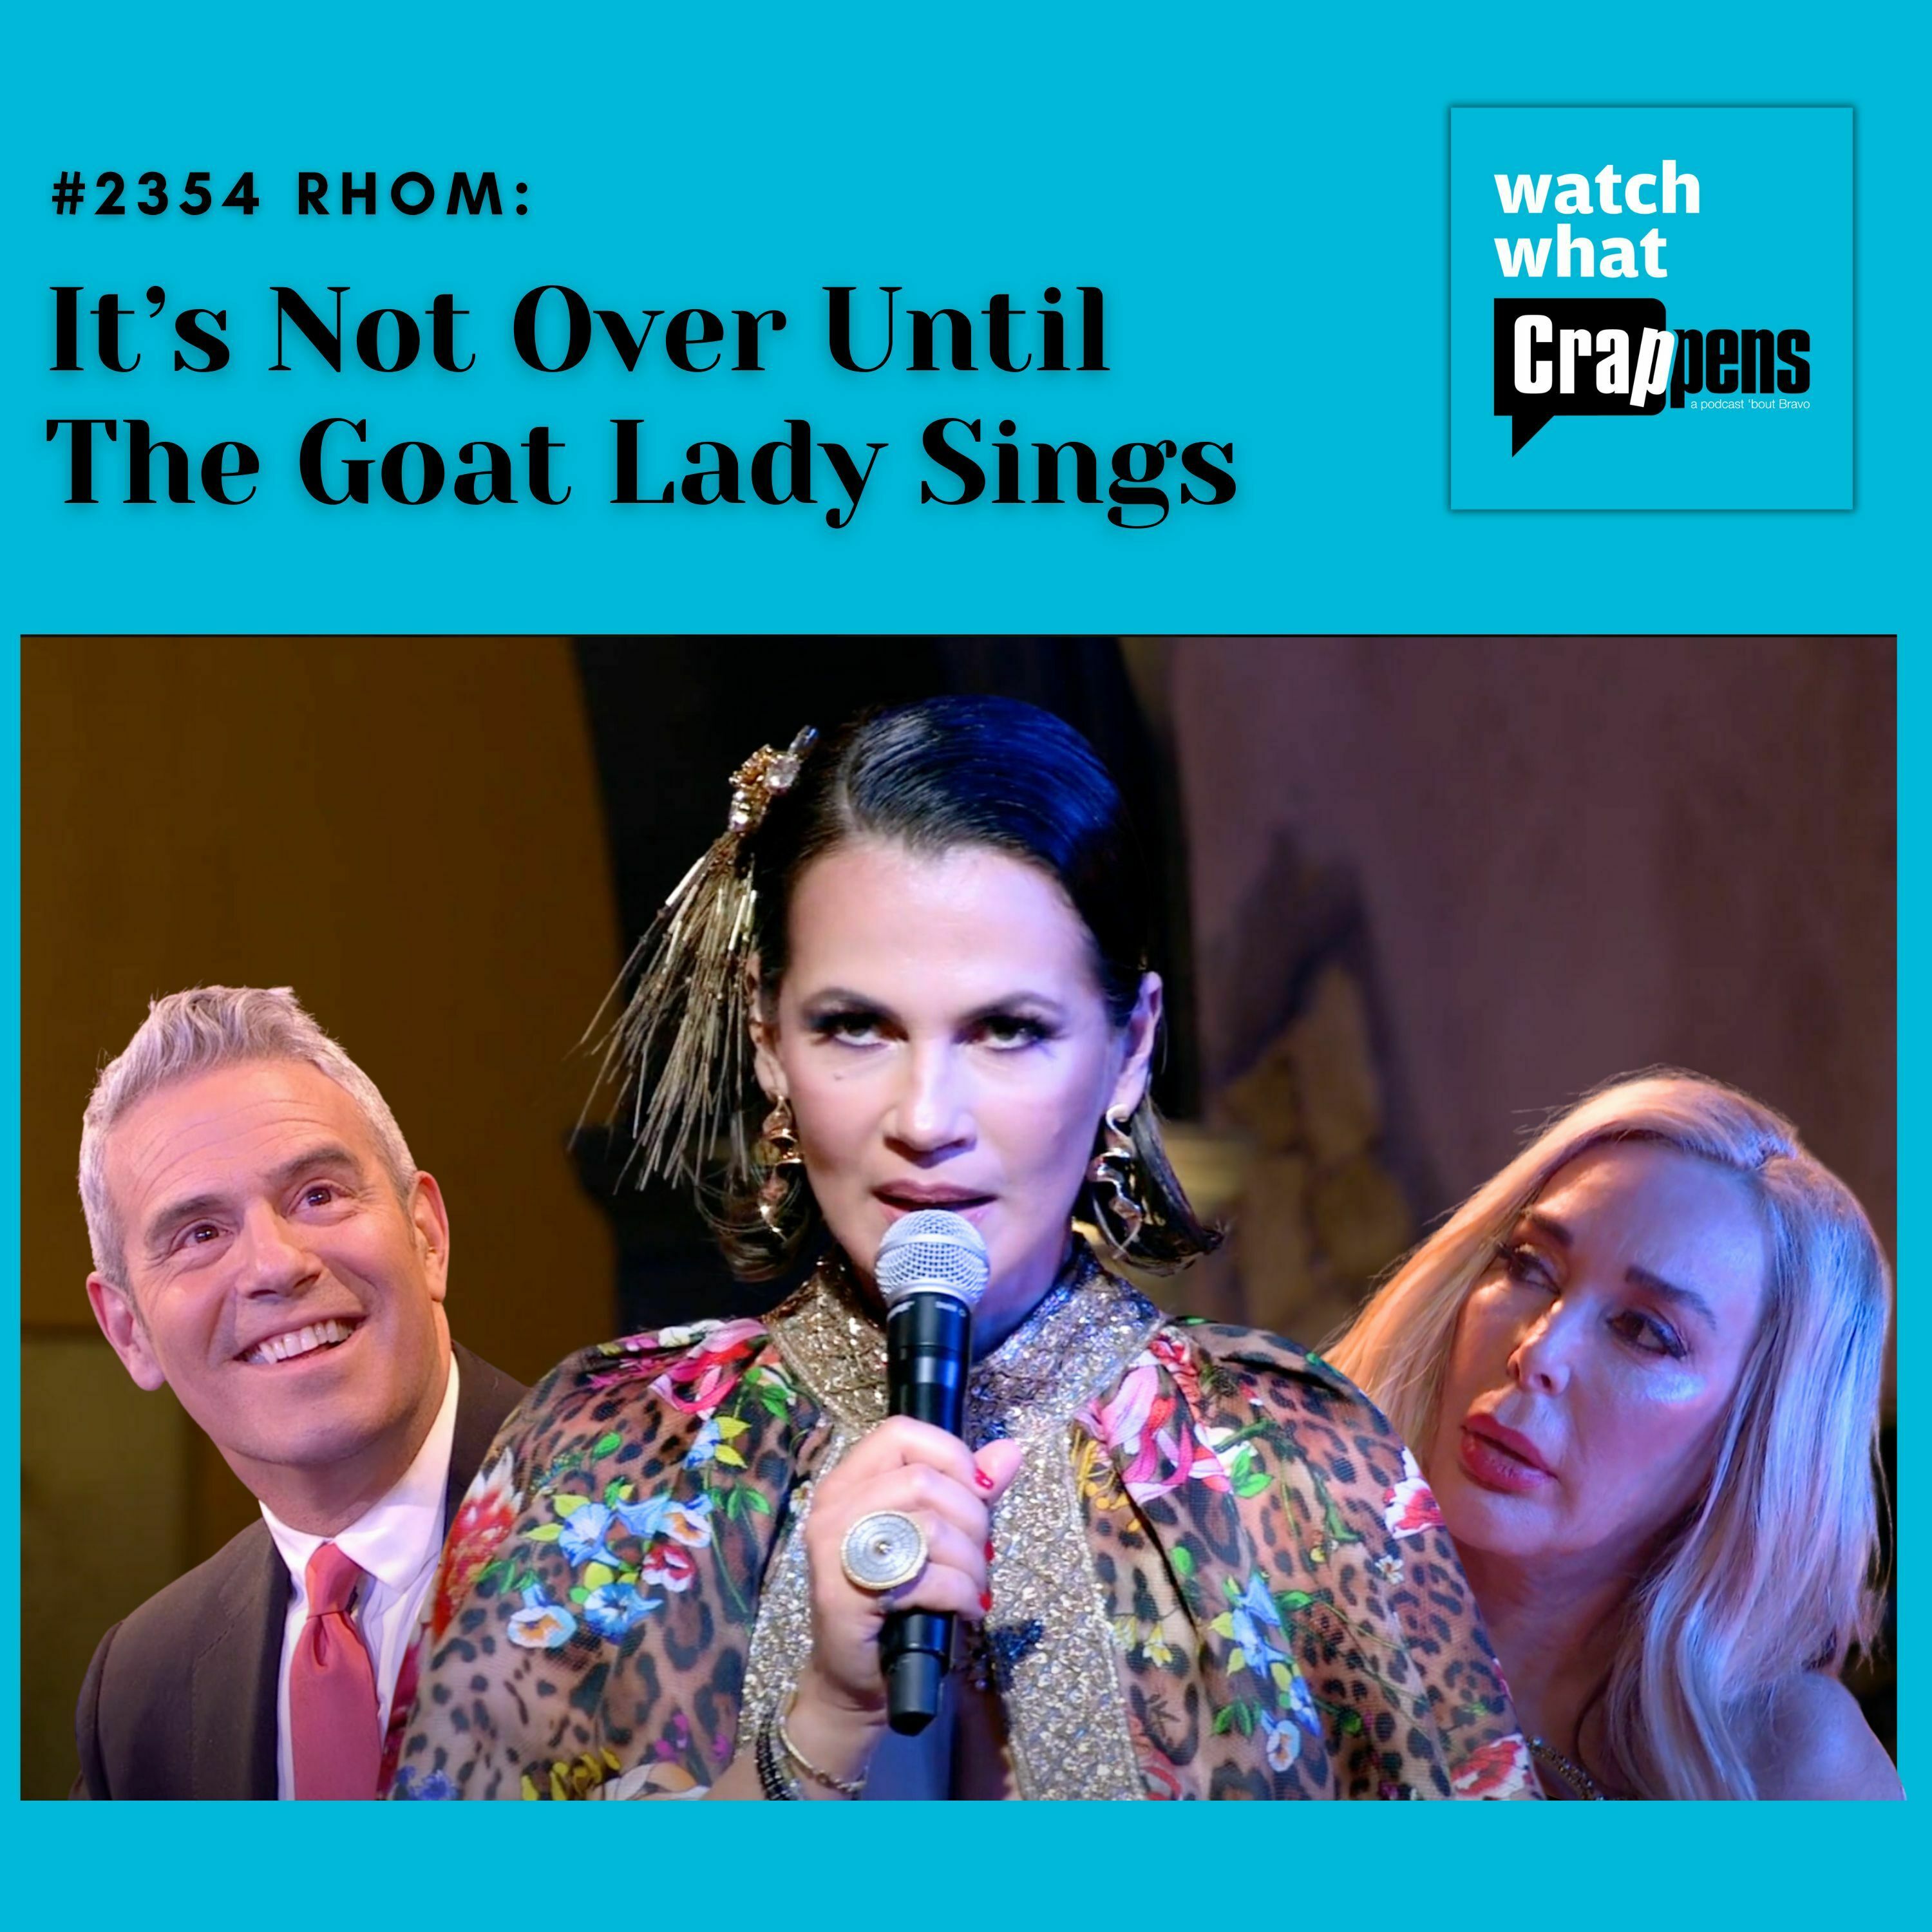 #2354 RHOM: It’s Not Over Until The Goat Lady Sings